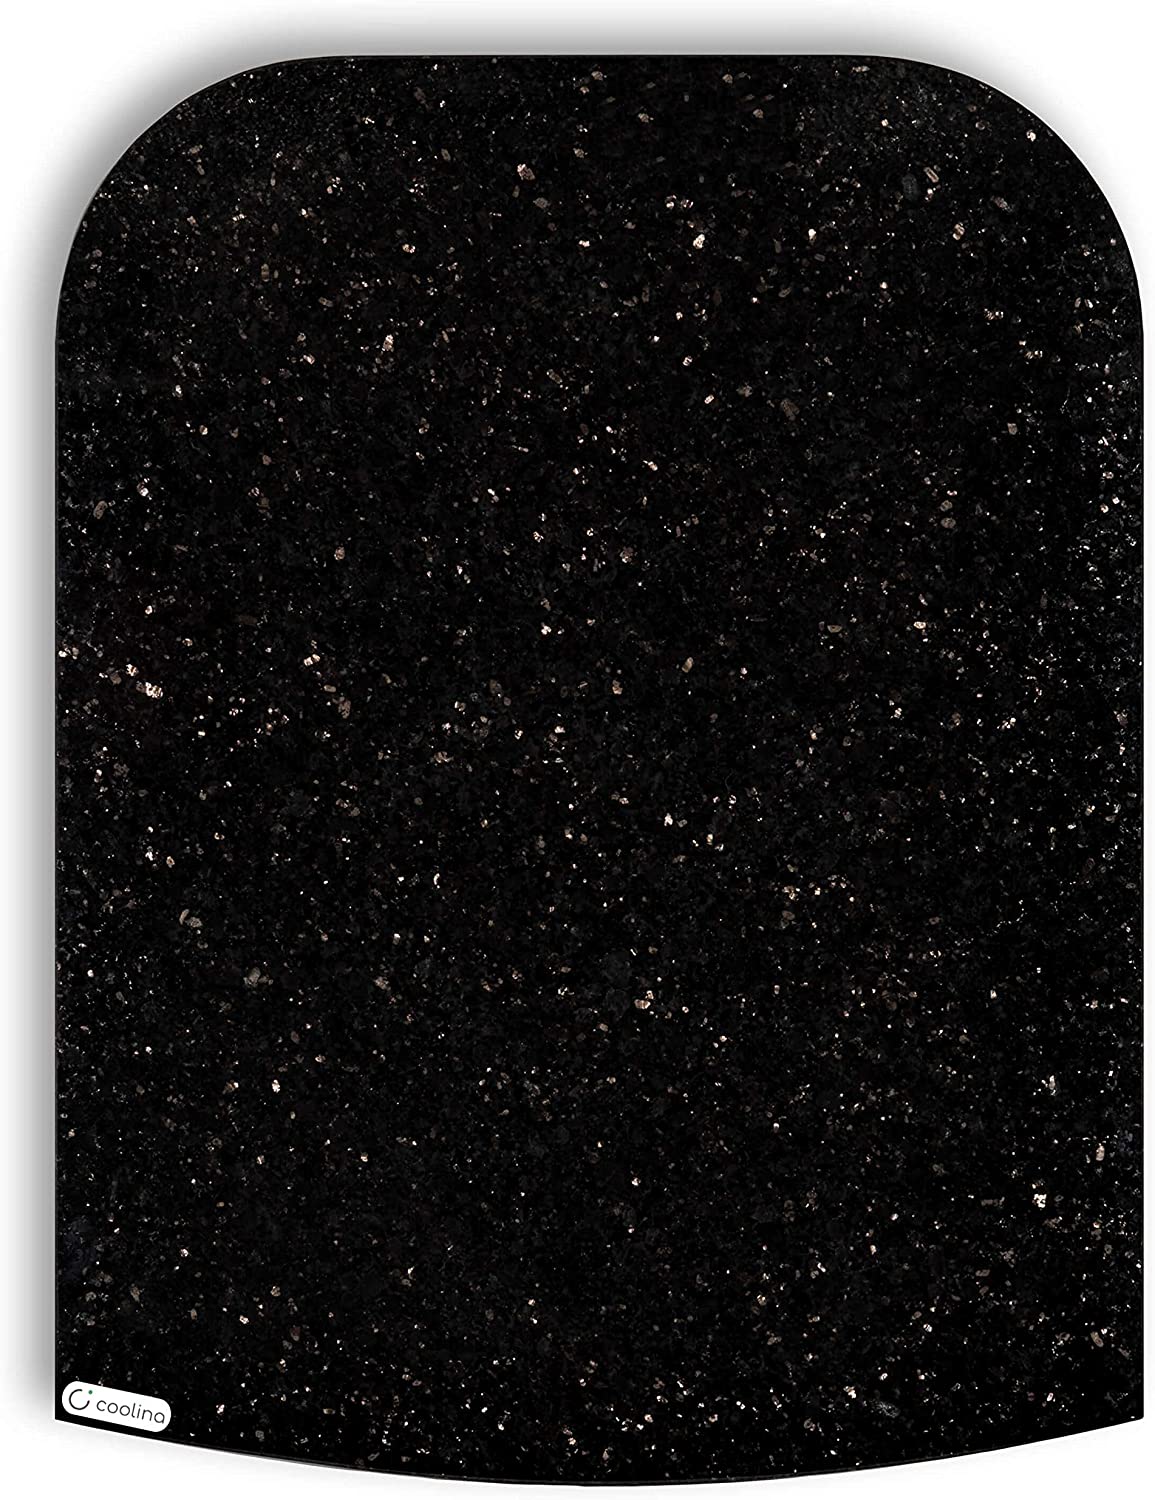 Stone4Slide Coolina Premium Sliding Board for Thermomix – Suitable for TM5, TM6 & TM31 – High-Quality Glider – Made of Granite – Star Galaxy